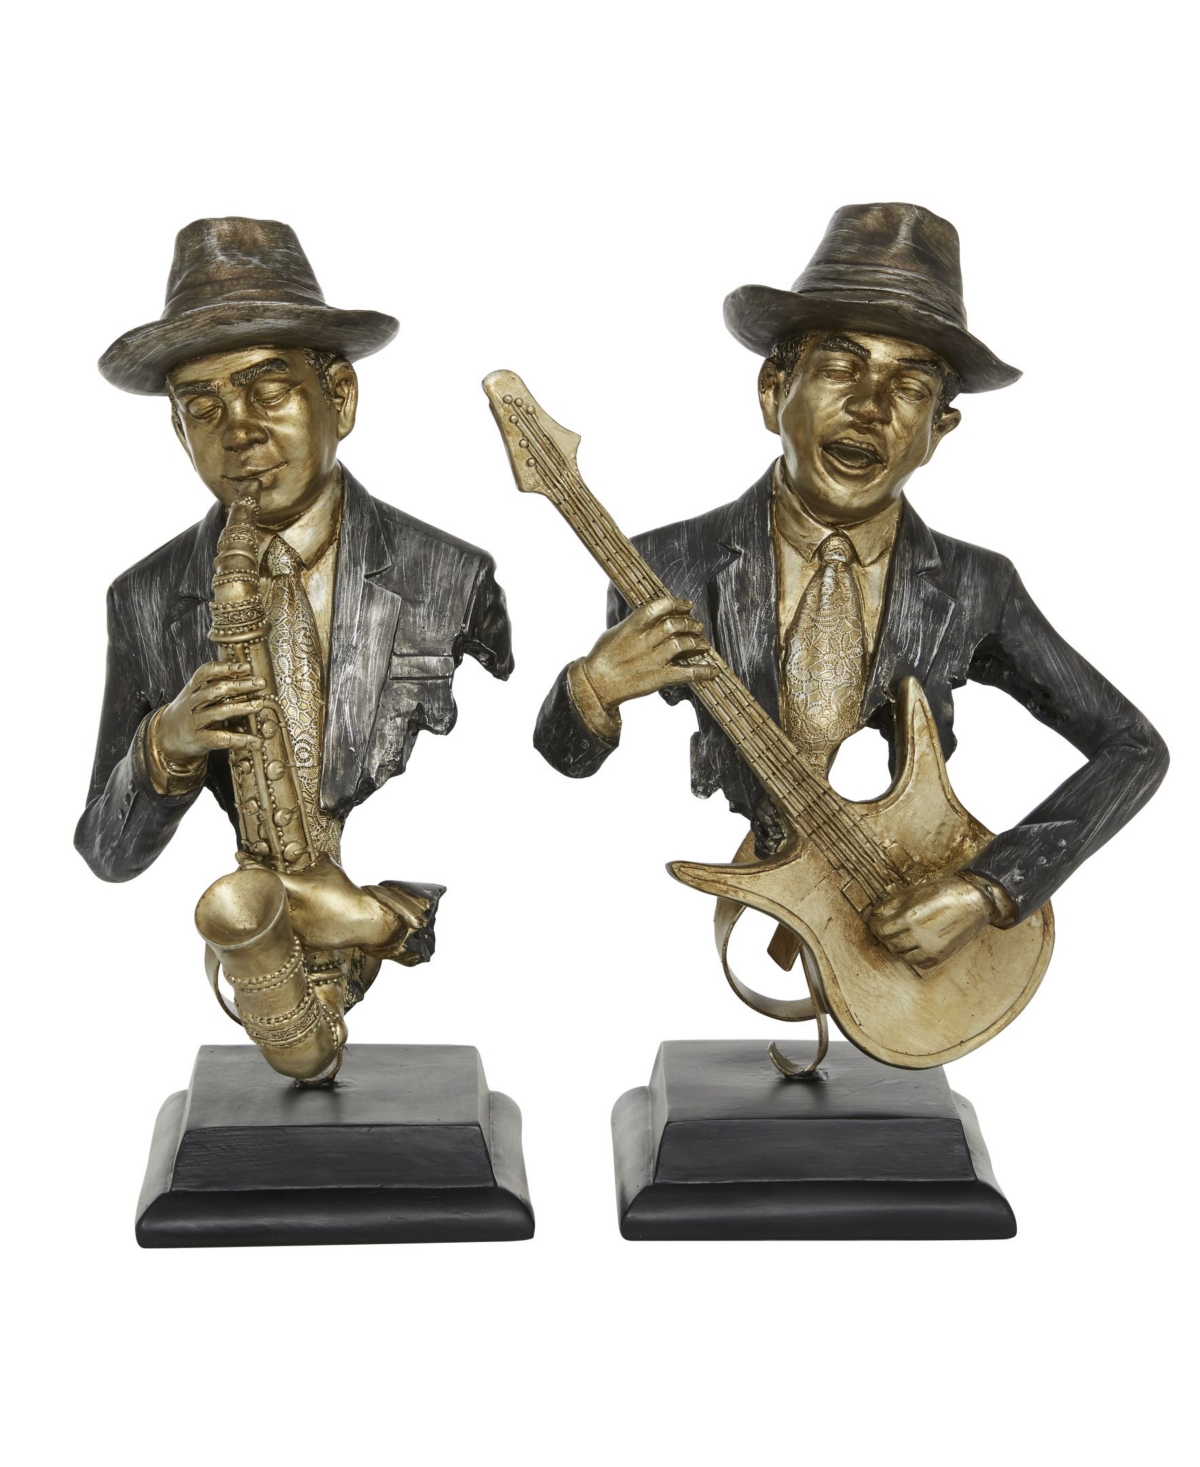 Rosemary Lane Vintage-like Musician Sculpture, Set Of 2 In Gold-tone